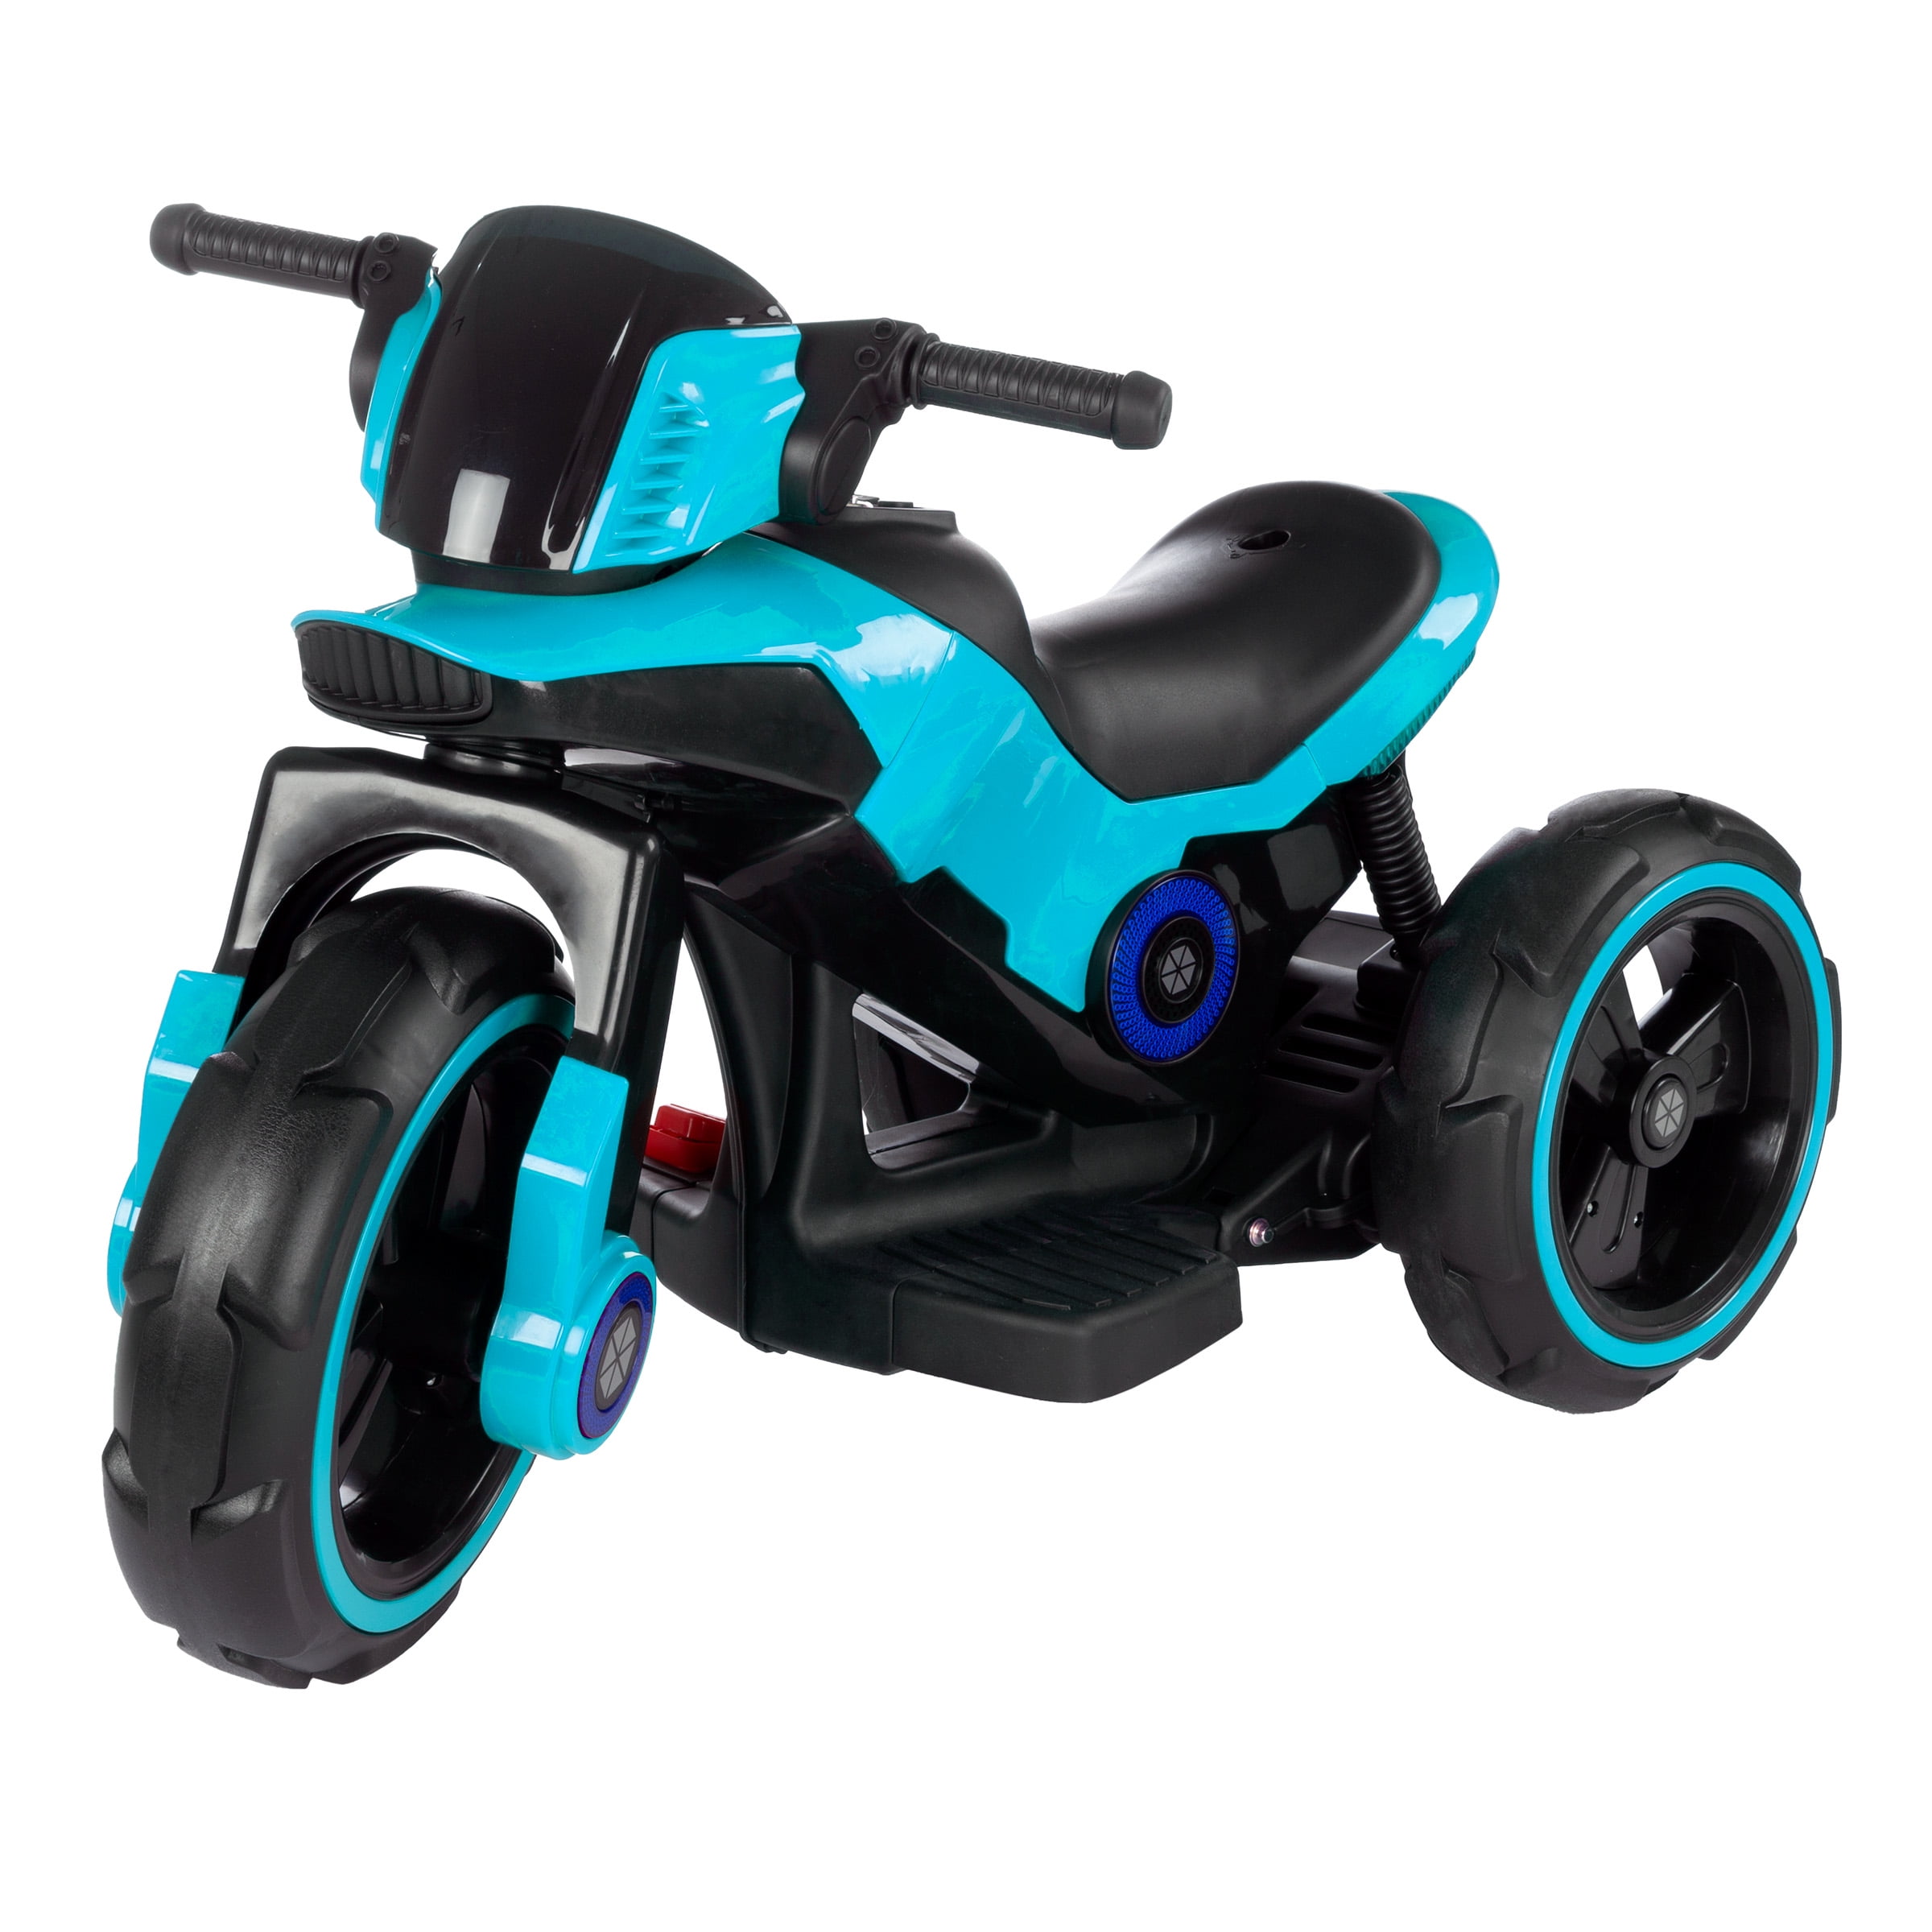 Ride-On Toy Trike Motorcycle –Battery Operated Electric Tricycle for